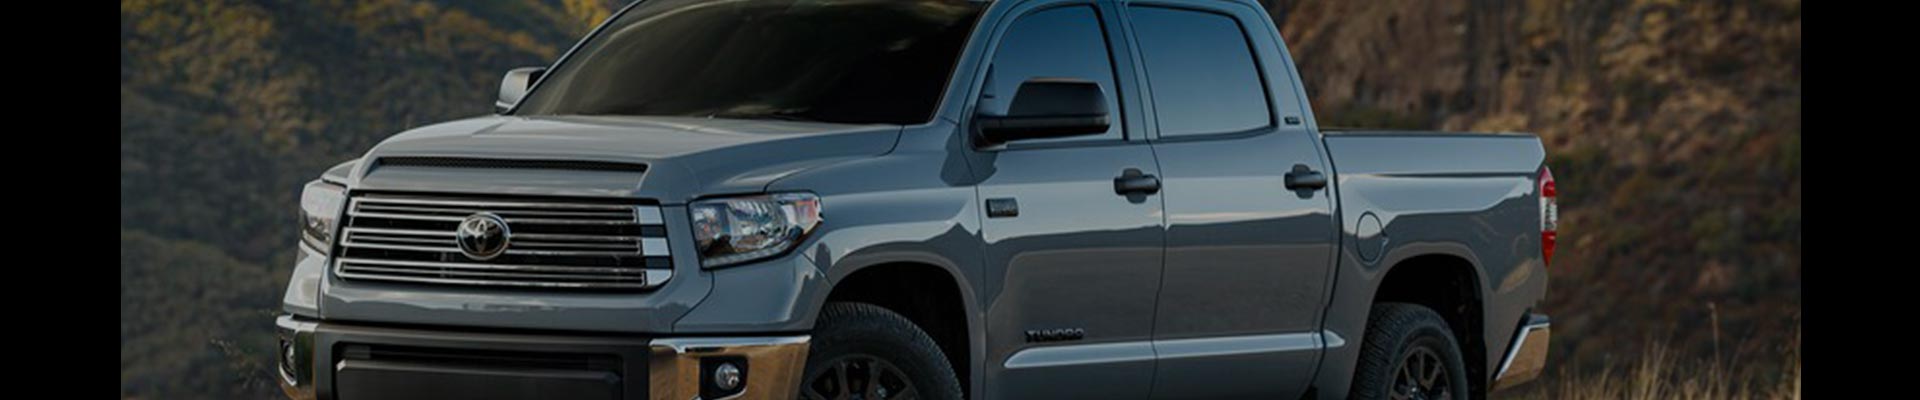 Shop Replacement and OEM 2012 Toyota Tundra Parts with Discounted Price on the Net